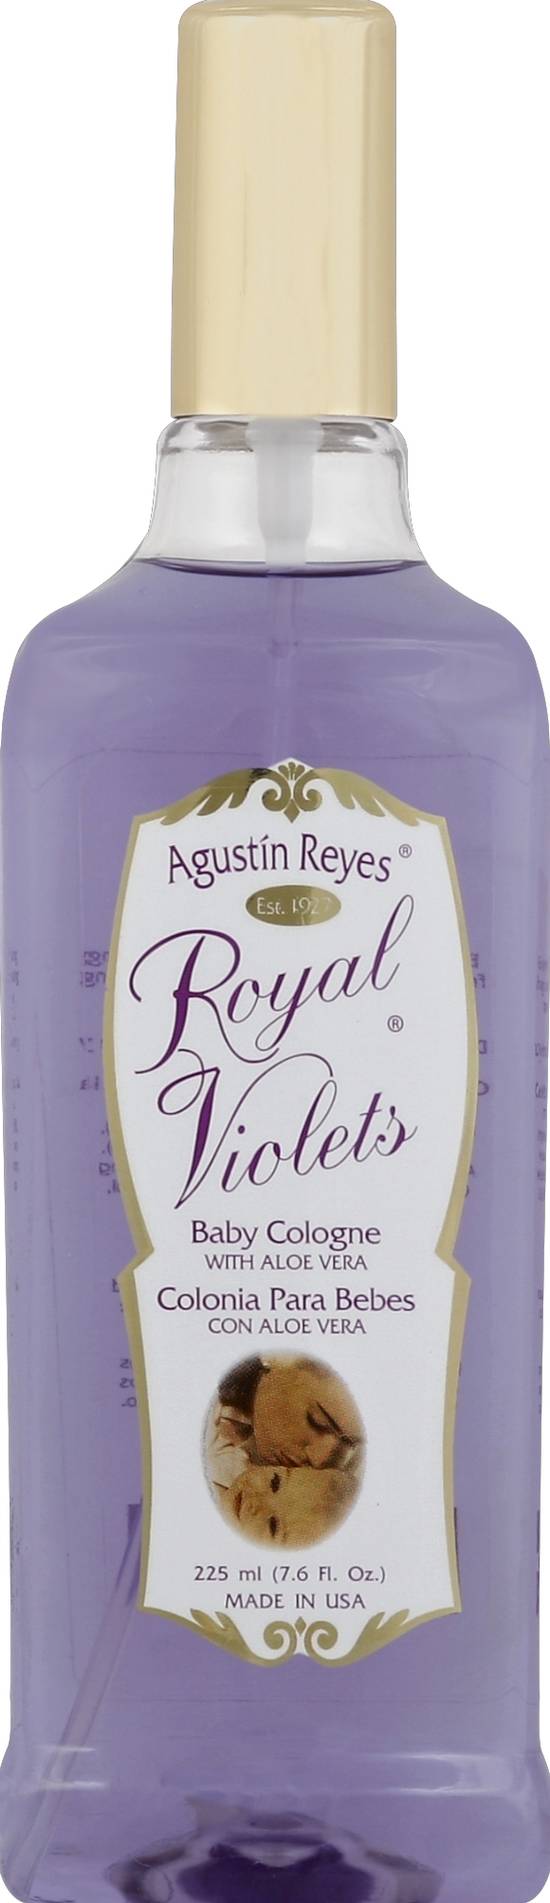 Agustin Reyes Royal Violets Baby Cologne With Aloe Vera